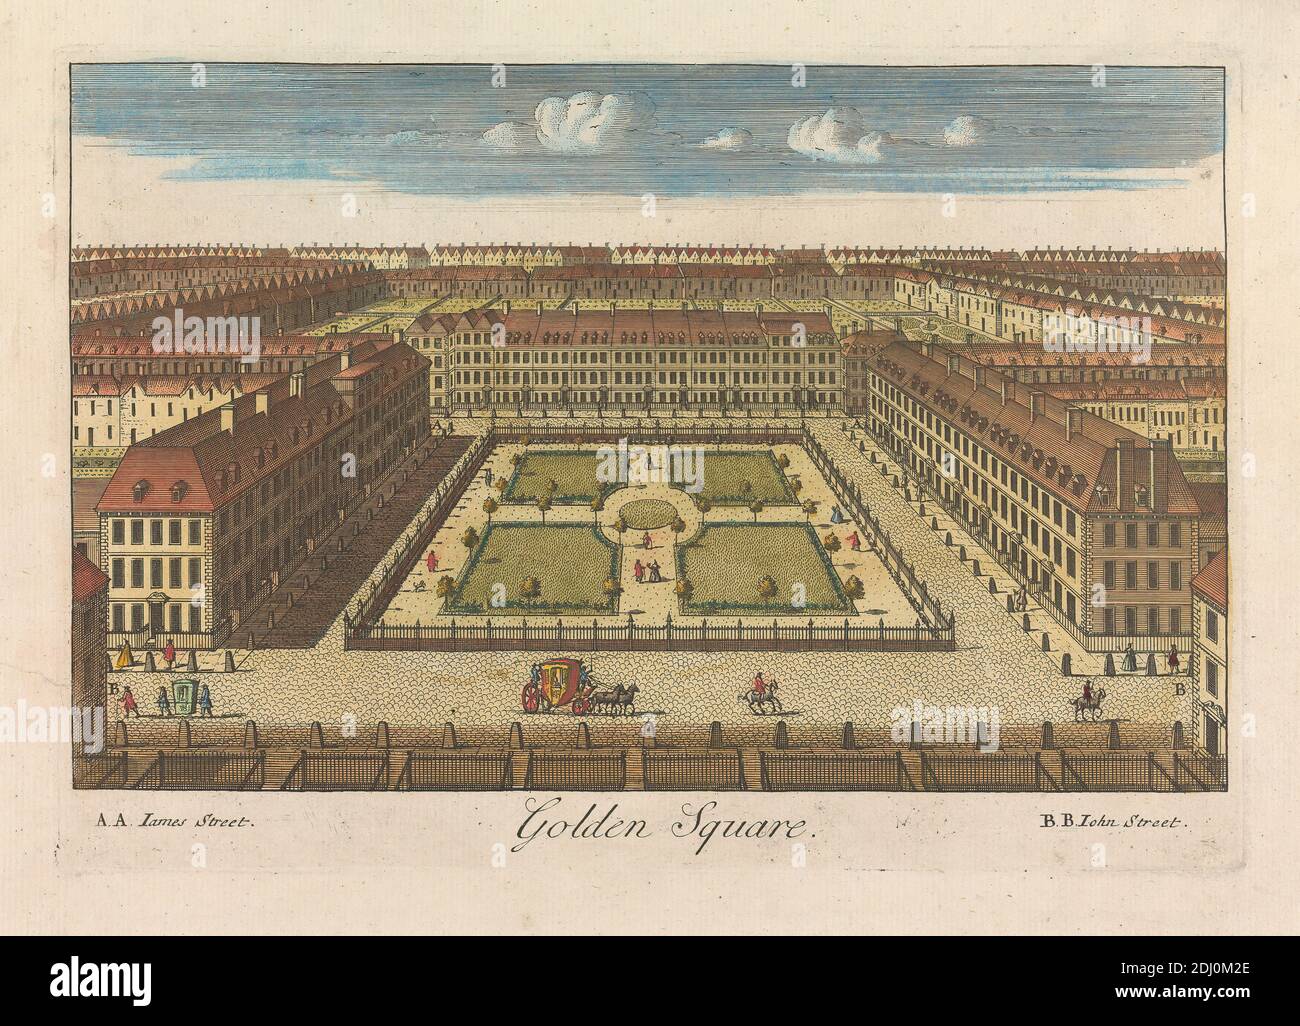 Golden Square, unknown artist, eighteenth century, after unknown artist, undated, Hand colored engraving Stock Photo